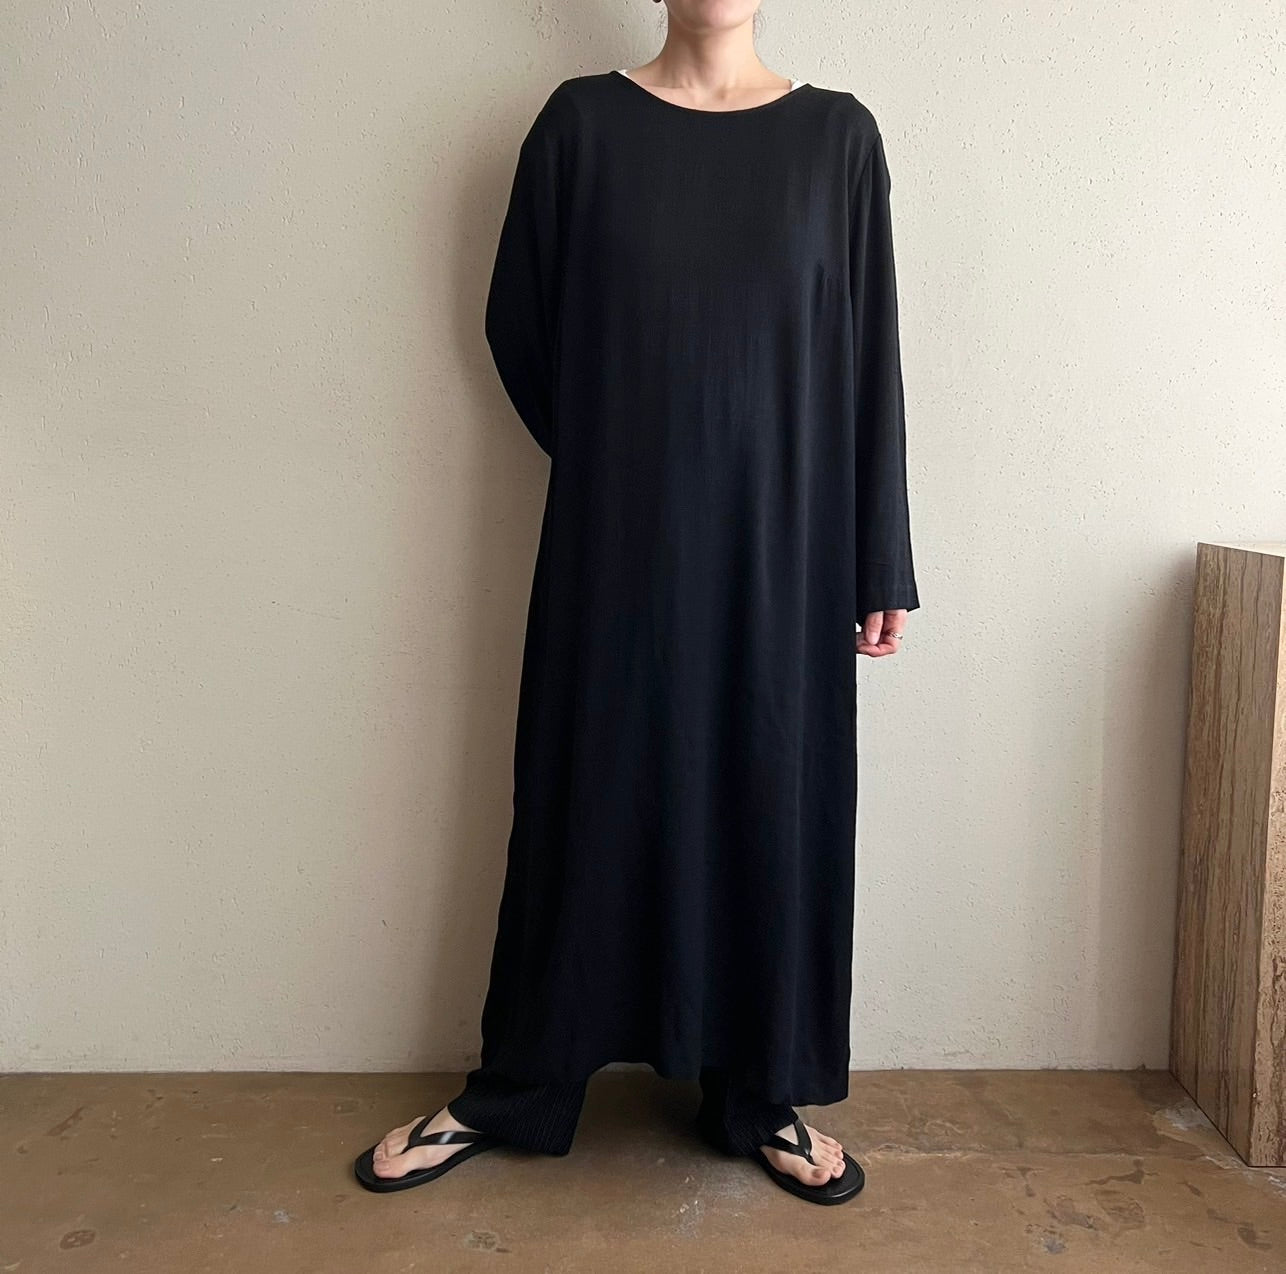 90s Rayon Black Dress Made in USA